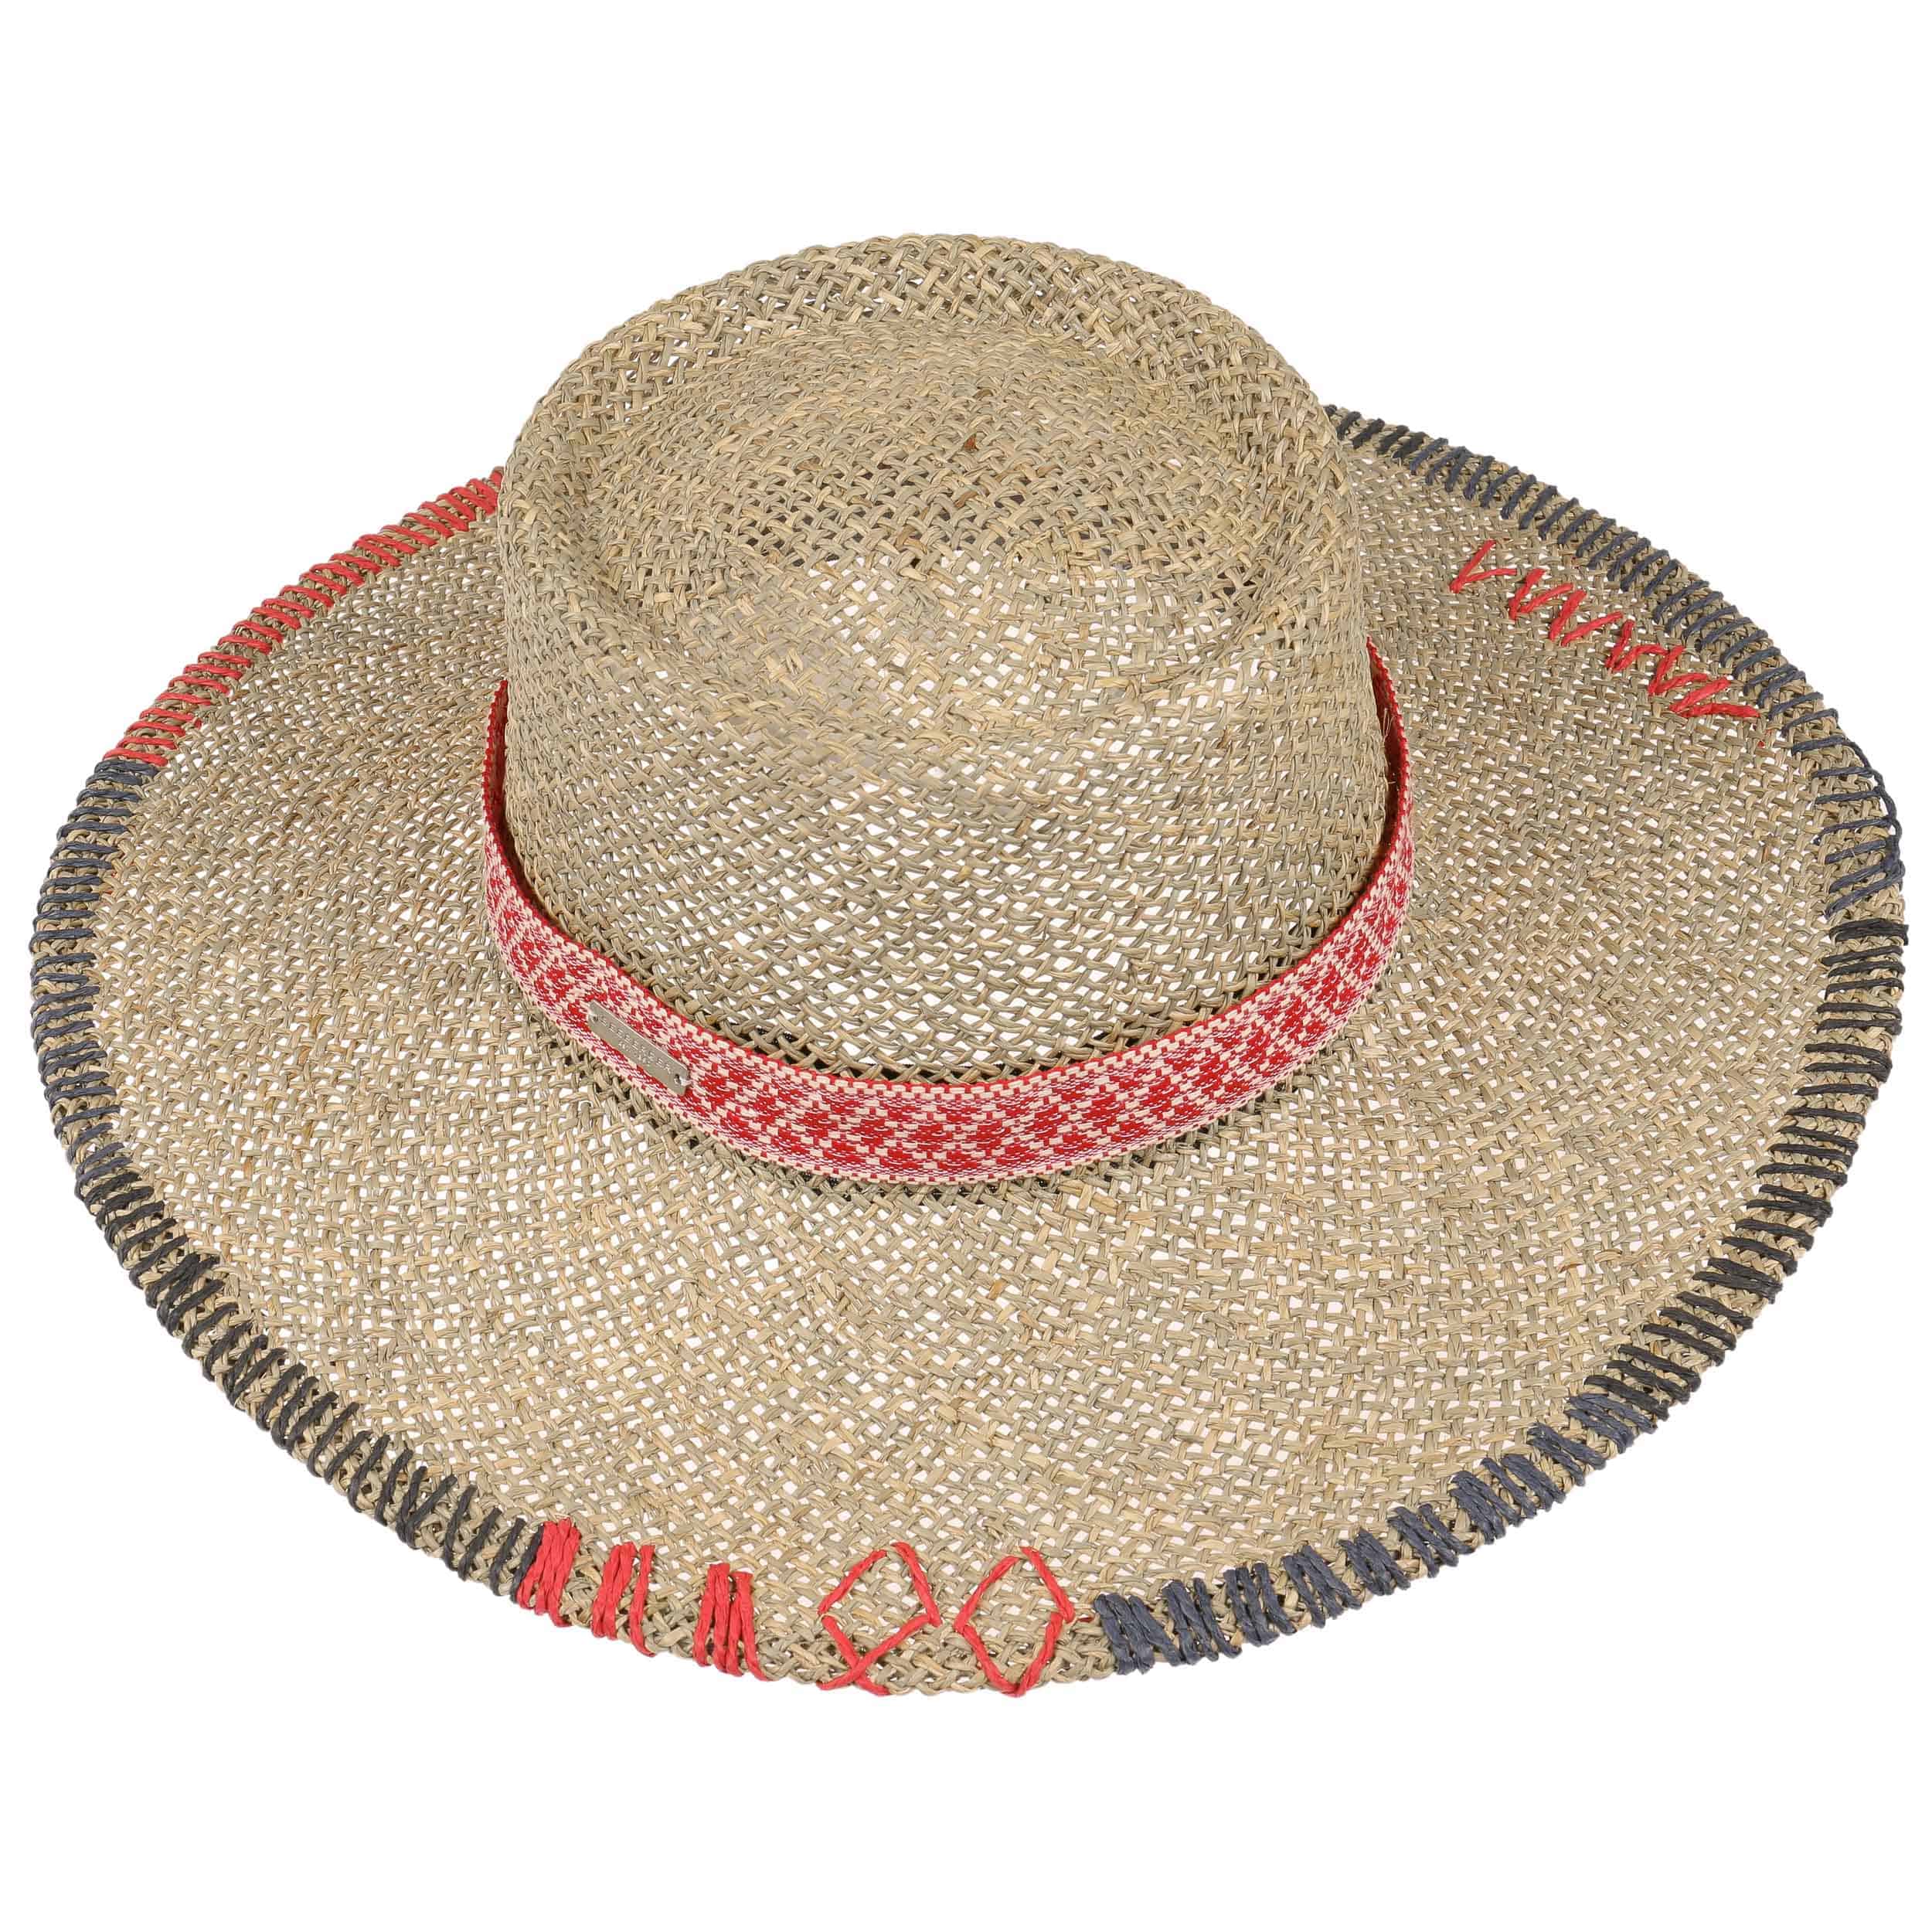 Matelot Seagrass Hat by Seeberger - 40,95